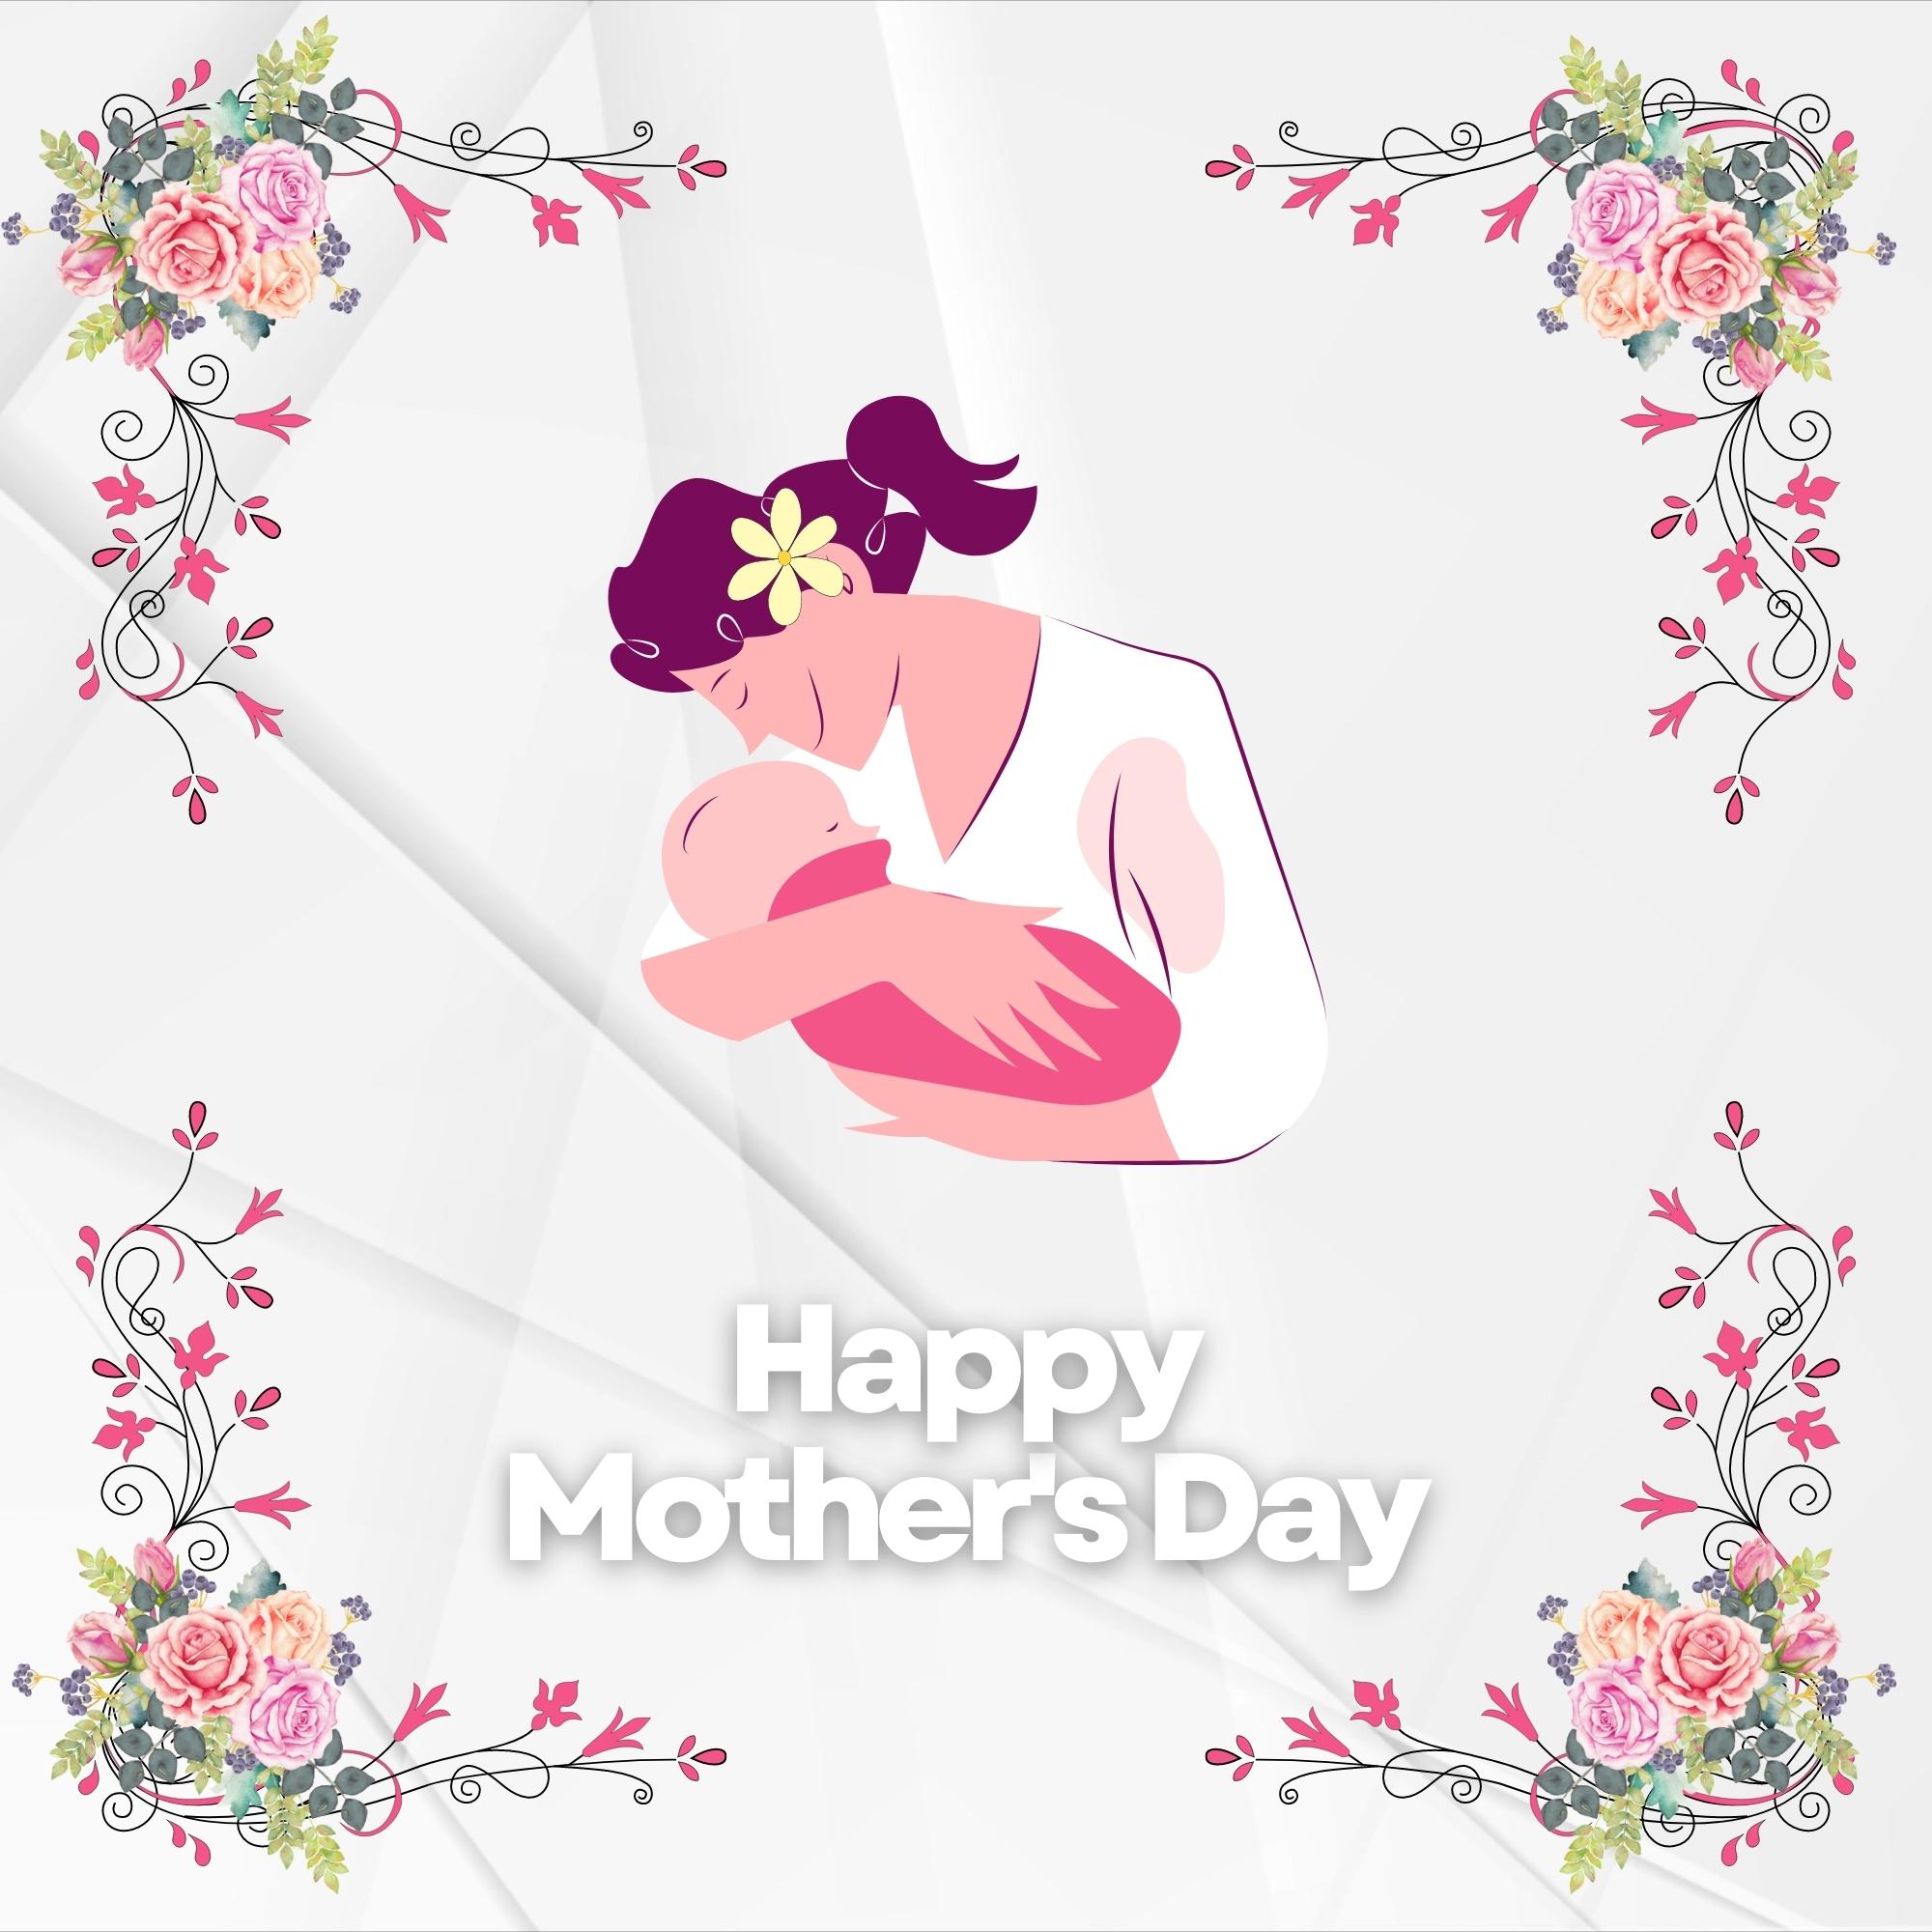 Happy Mothers Day Images | 1021 | Free Download [8k,4k,Hd]